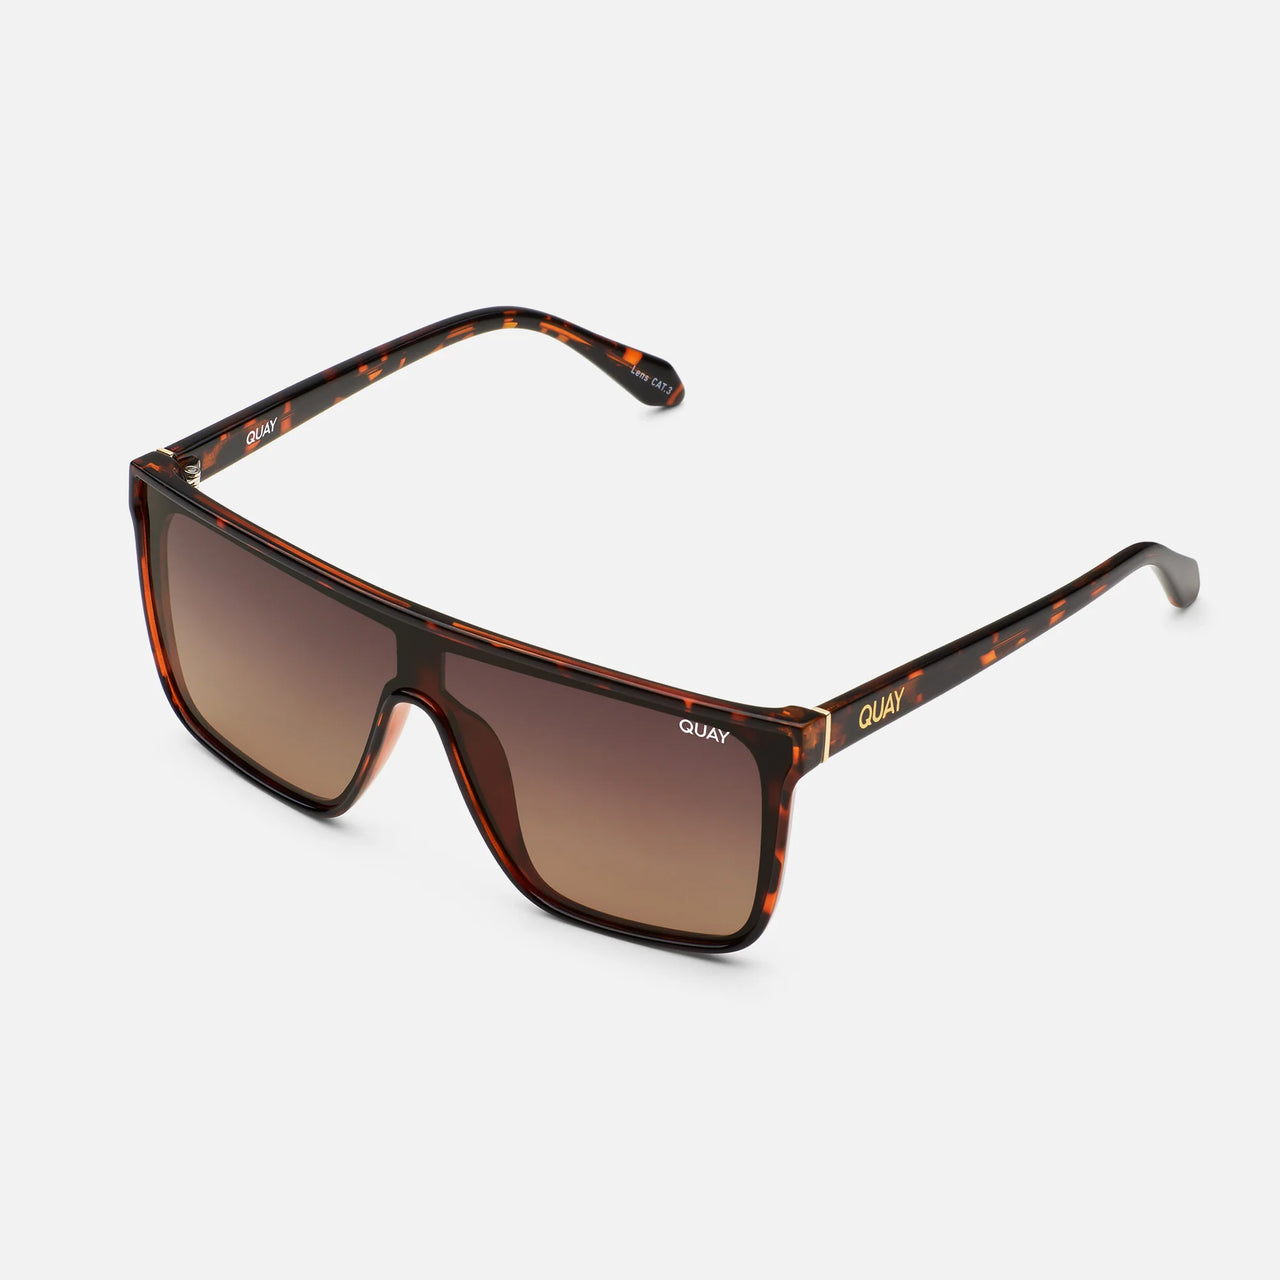 Nightfall Tort / Brown Polarized Lens, Sunglass Acc by Quay | LIT Boutique